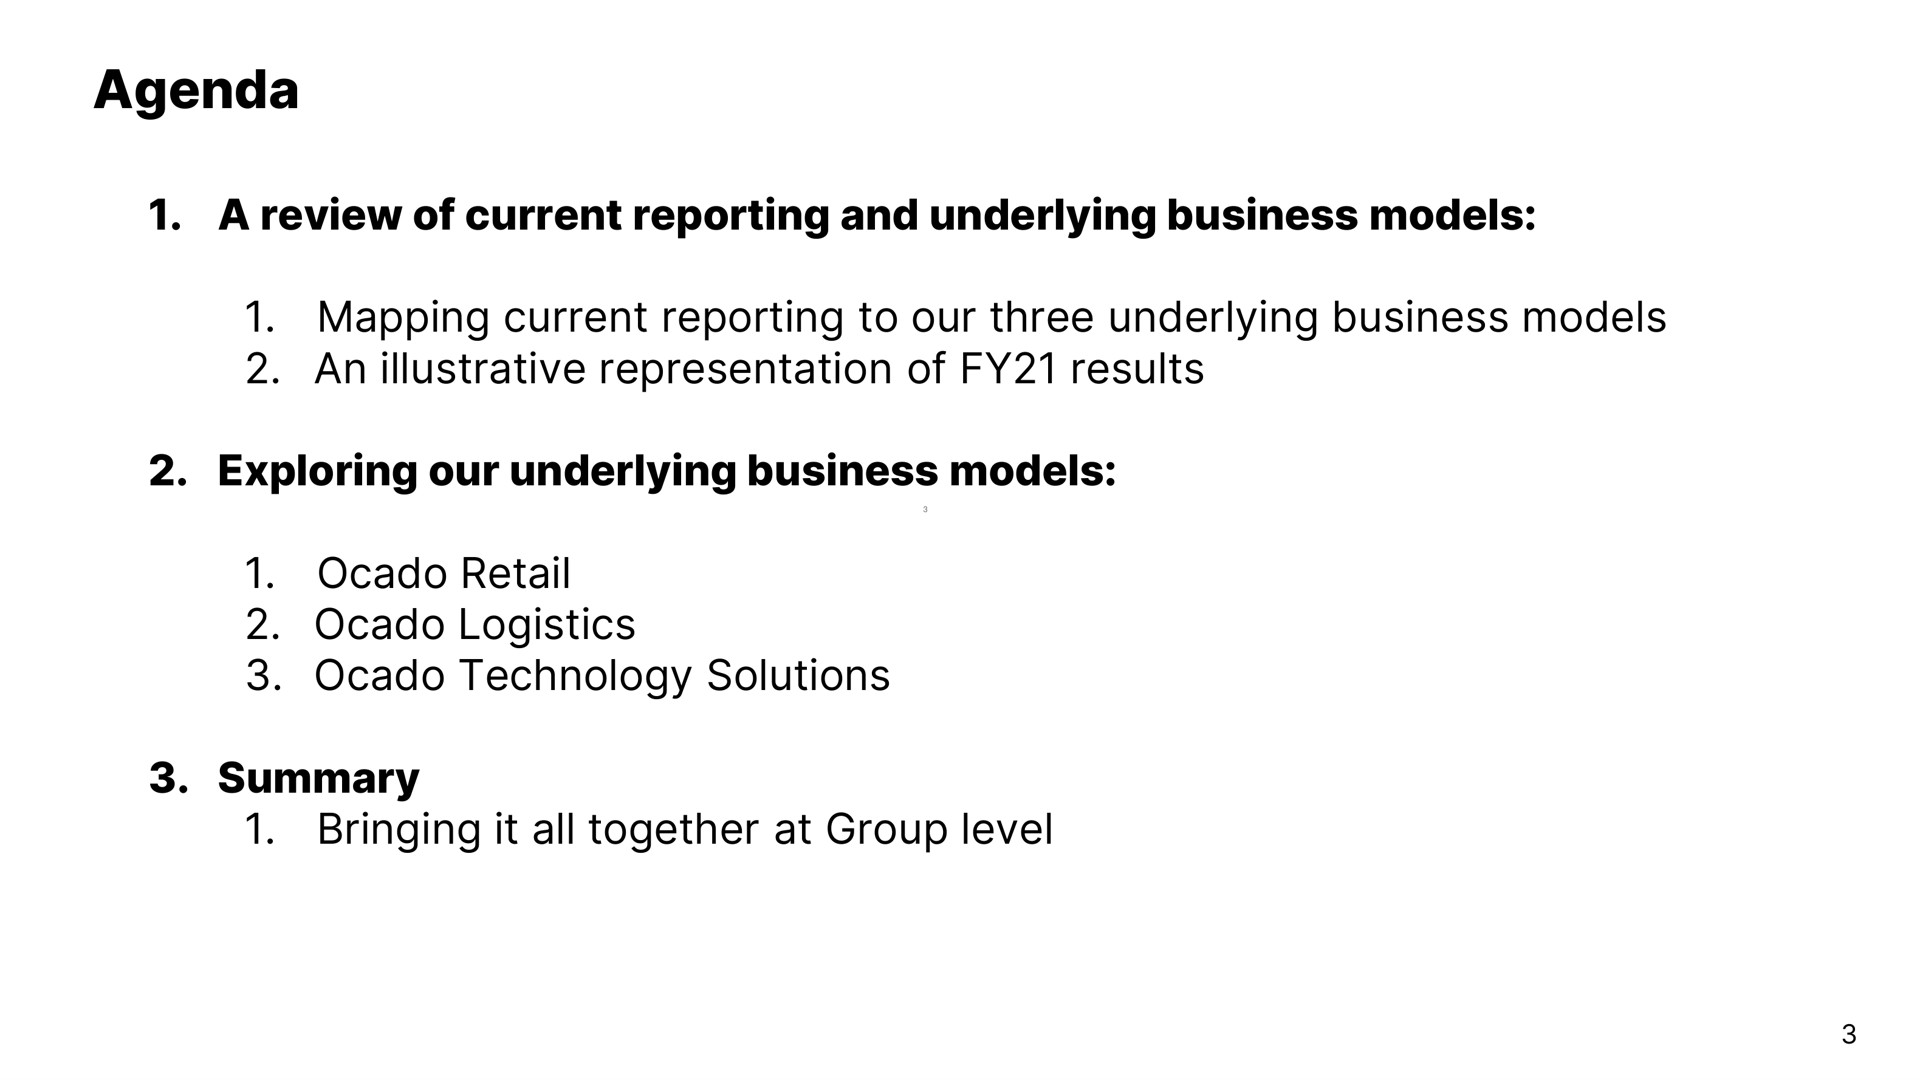 agenda a review of current reporting and underlying business models mapping current reporting to our three underlying business models an illustrative representation of results exploring our underlying business models retail logistics technology solutions summary bringing it all together at group level | Ocado